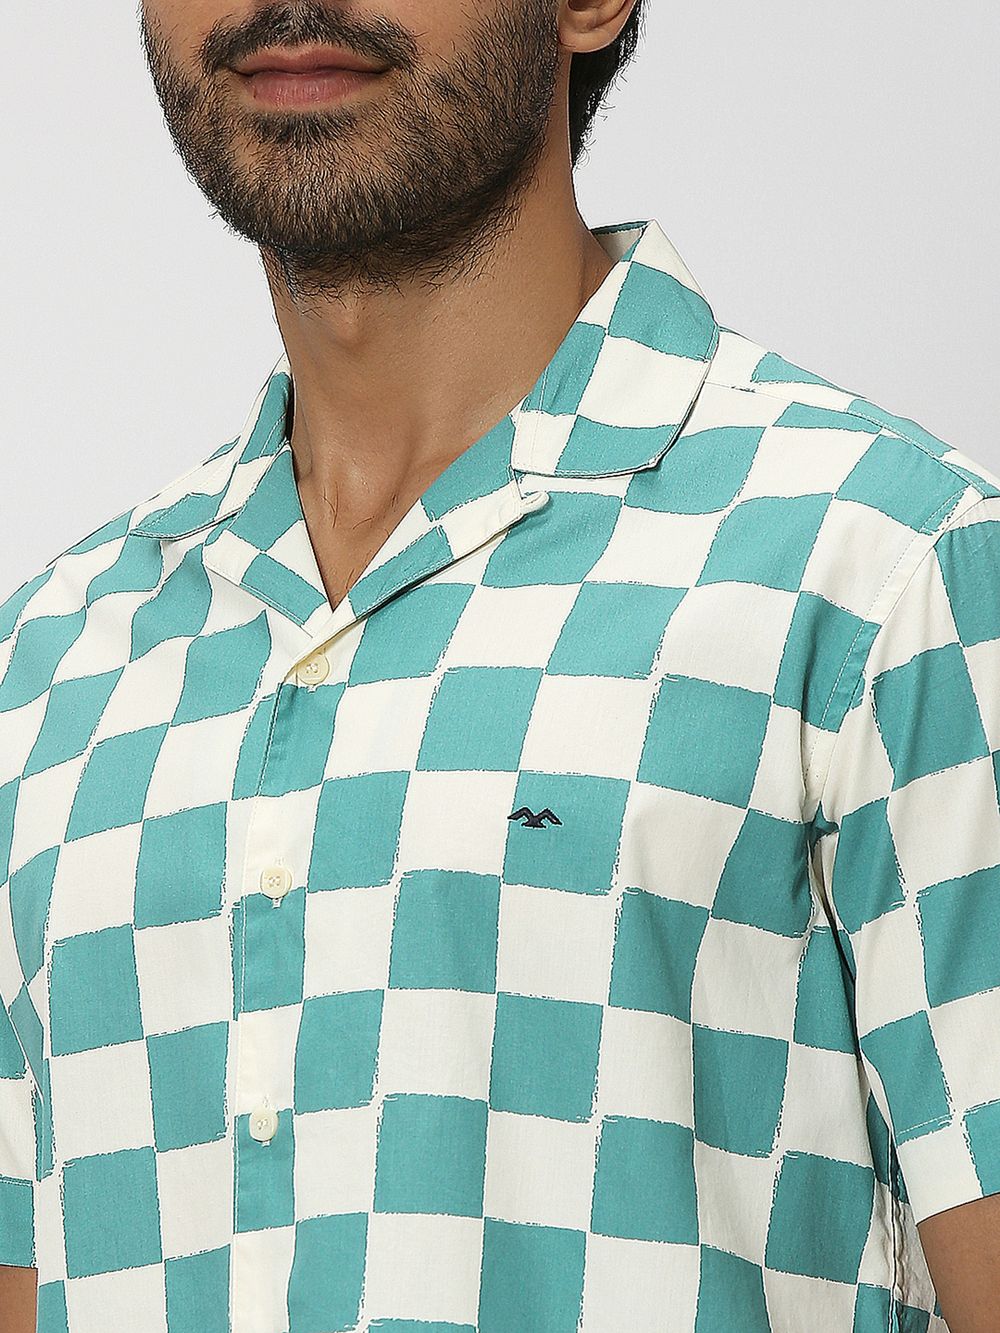 Turquoise Square Check Shirt